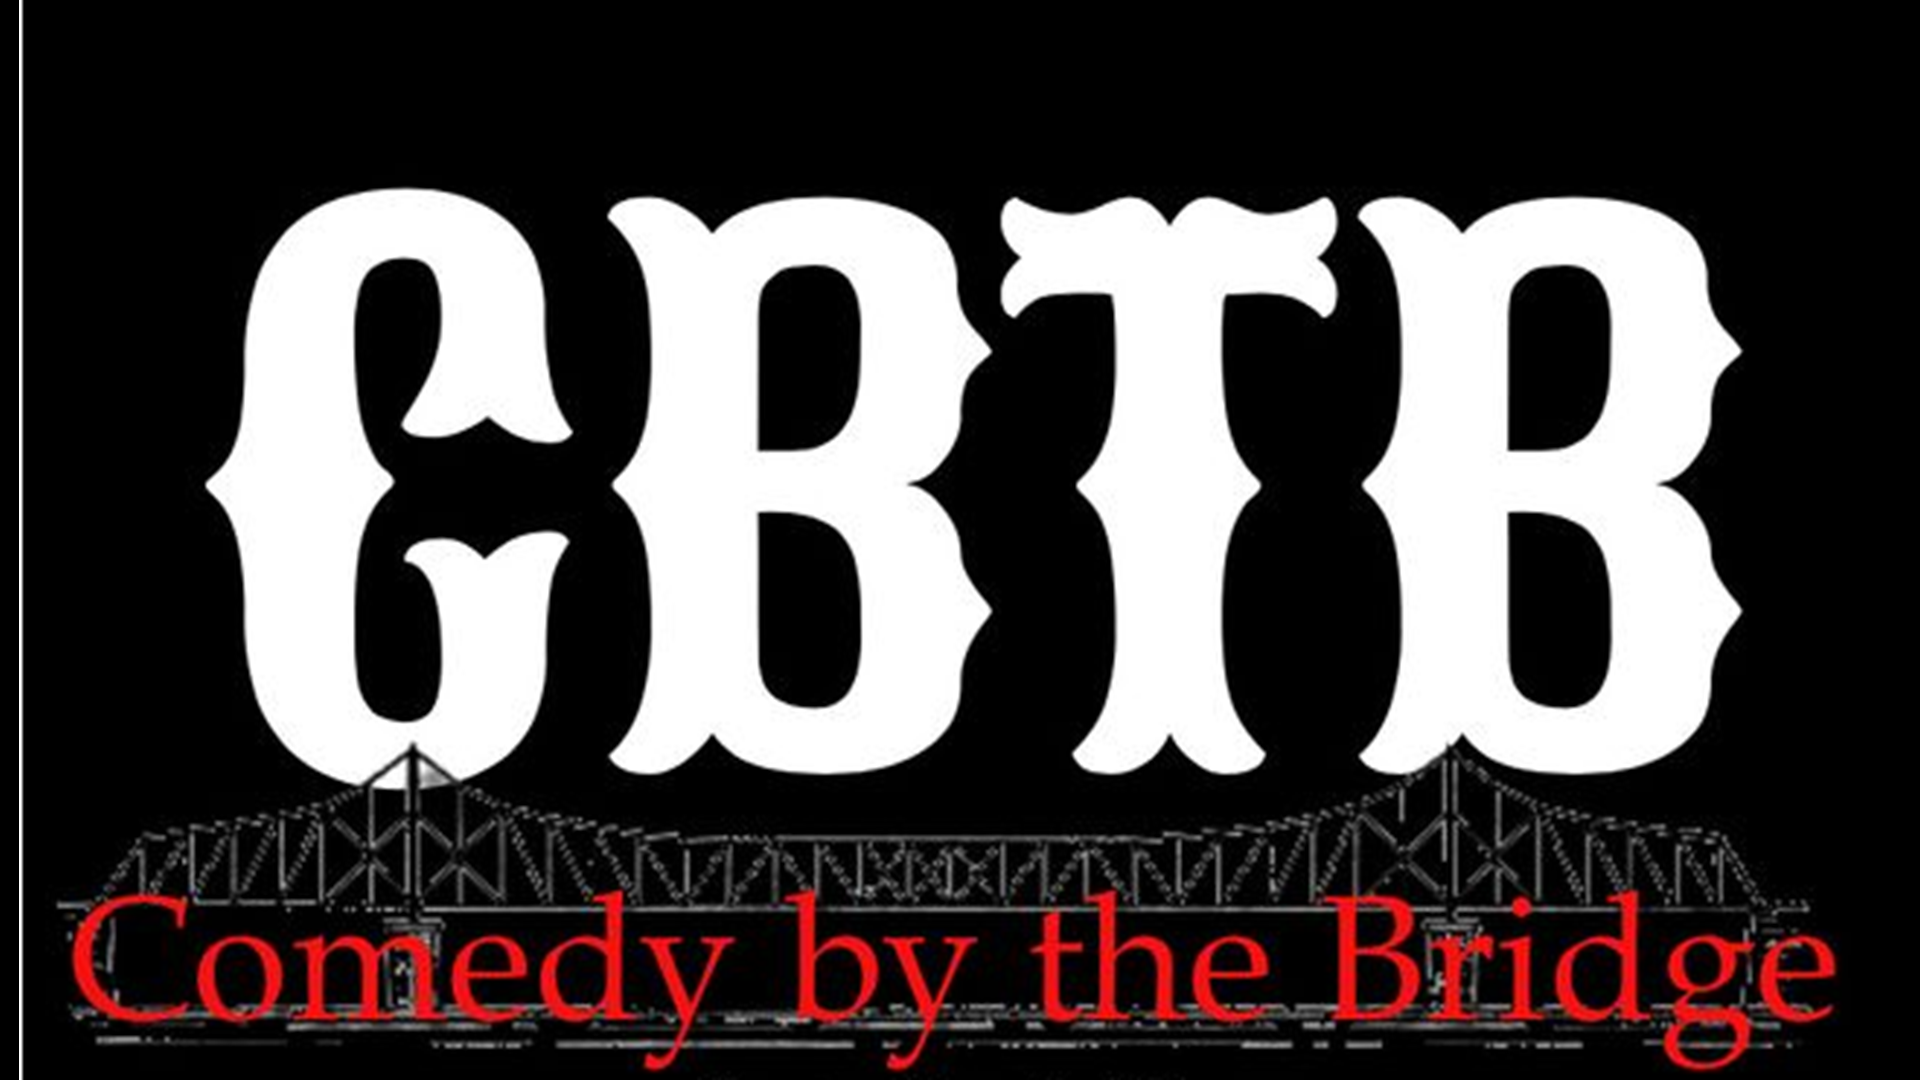 Comedy by the Bridge is at the Sheraton in Jeffersonville, which is located at 700 West Riverside Drive in Jeffersonville, IN.